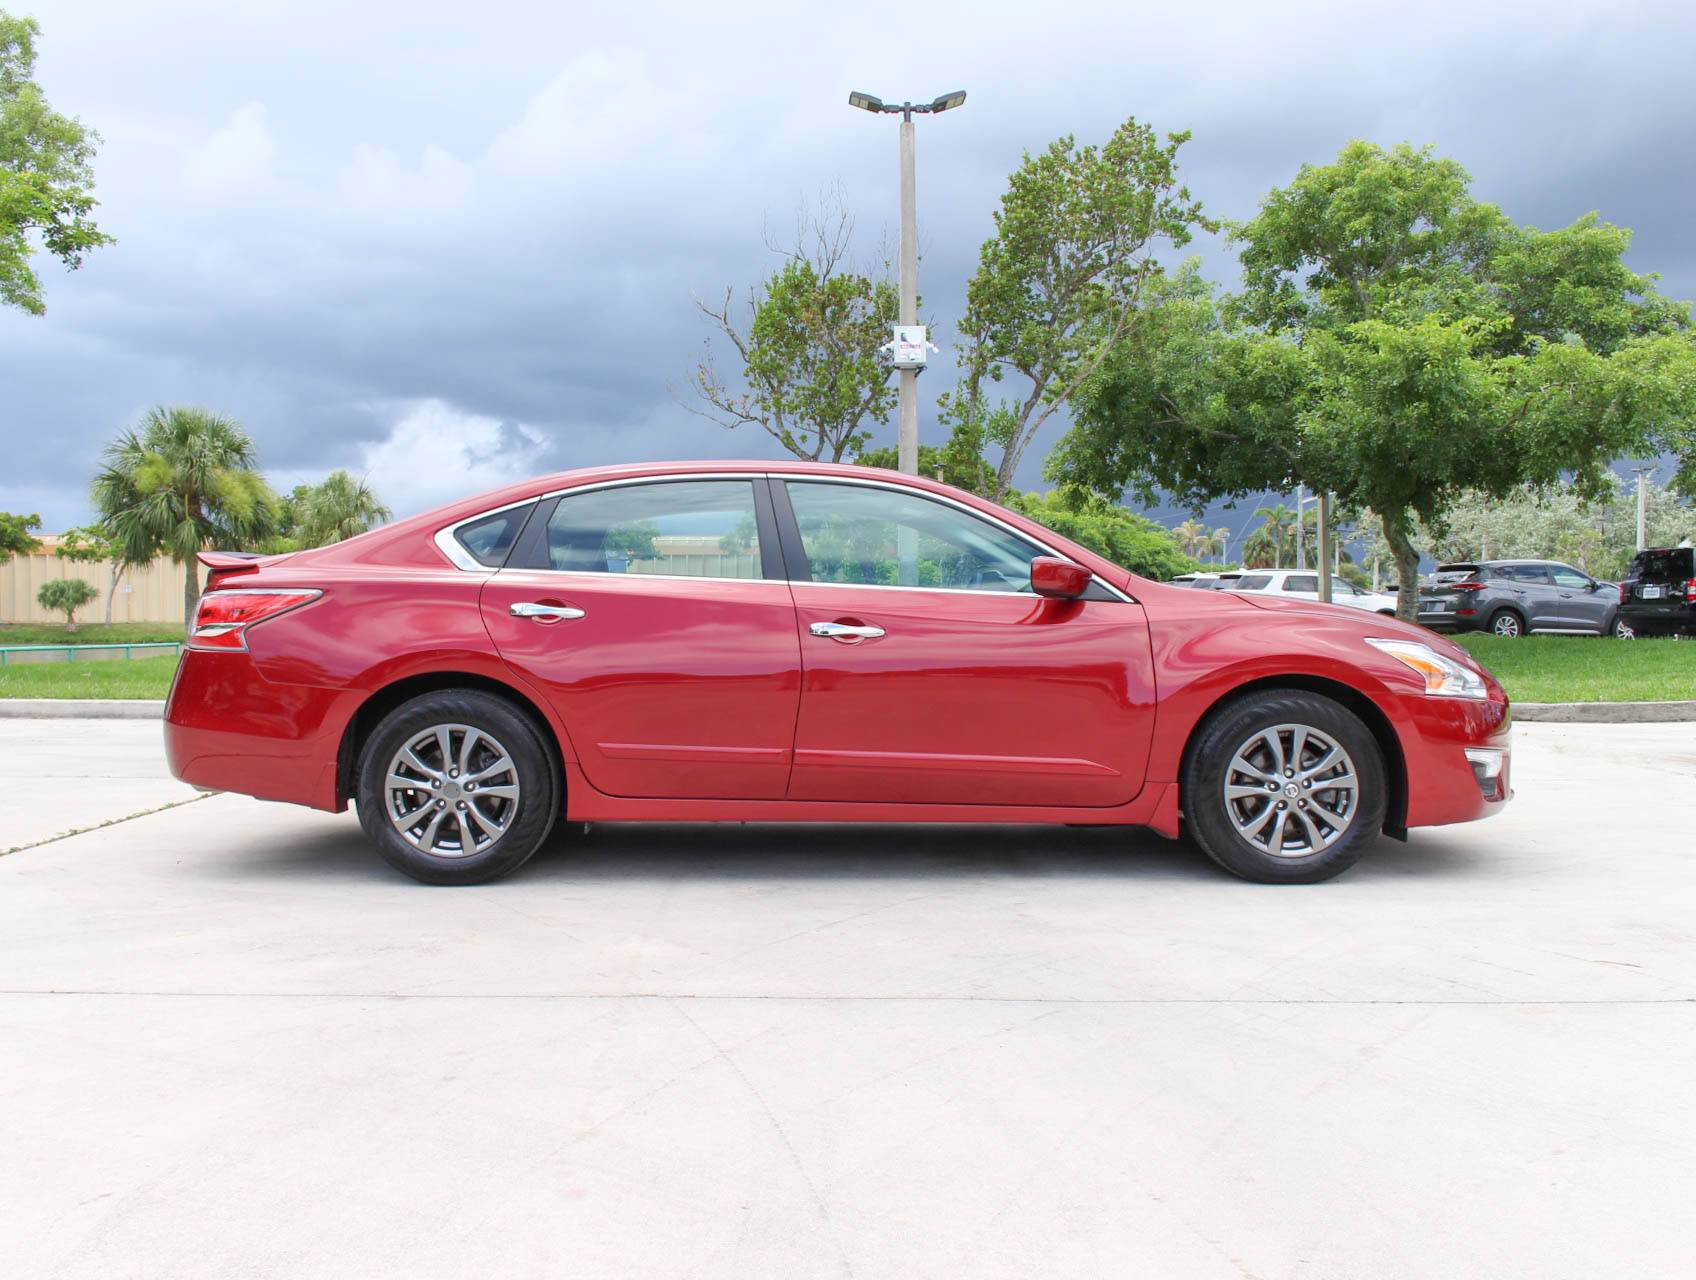 Florida Fine Cars - Used NISSAN ALTIMA 2015 MARGATE Special Edition